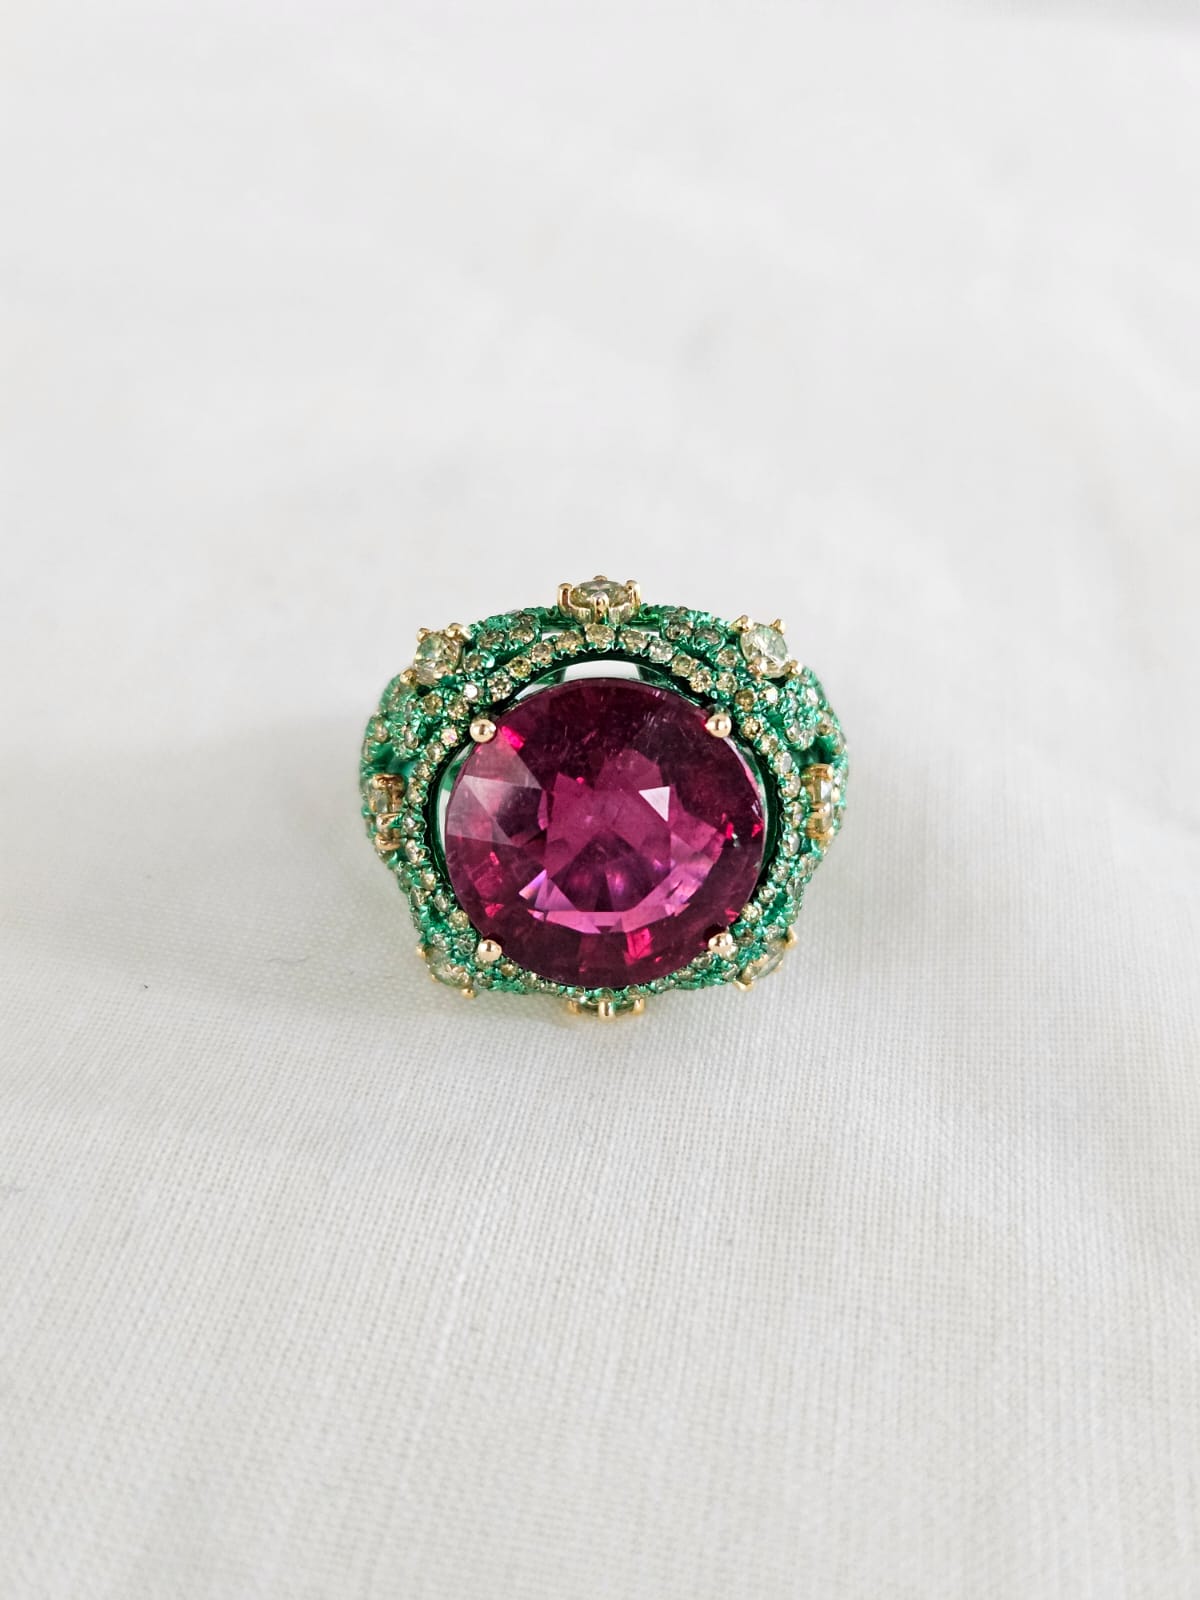 A very unique and one of a kind, Tourmaline Engagement Ring set in 18K Yellow Gold with Green Rhodium & Diamonds. The weight of the Tourmaline is 10.21 carats. The combined Diamonds weight is 1.83 carats. Net 18K Gold weight is 7.46 grams. The